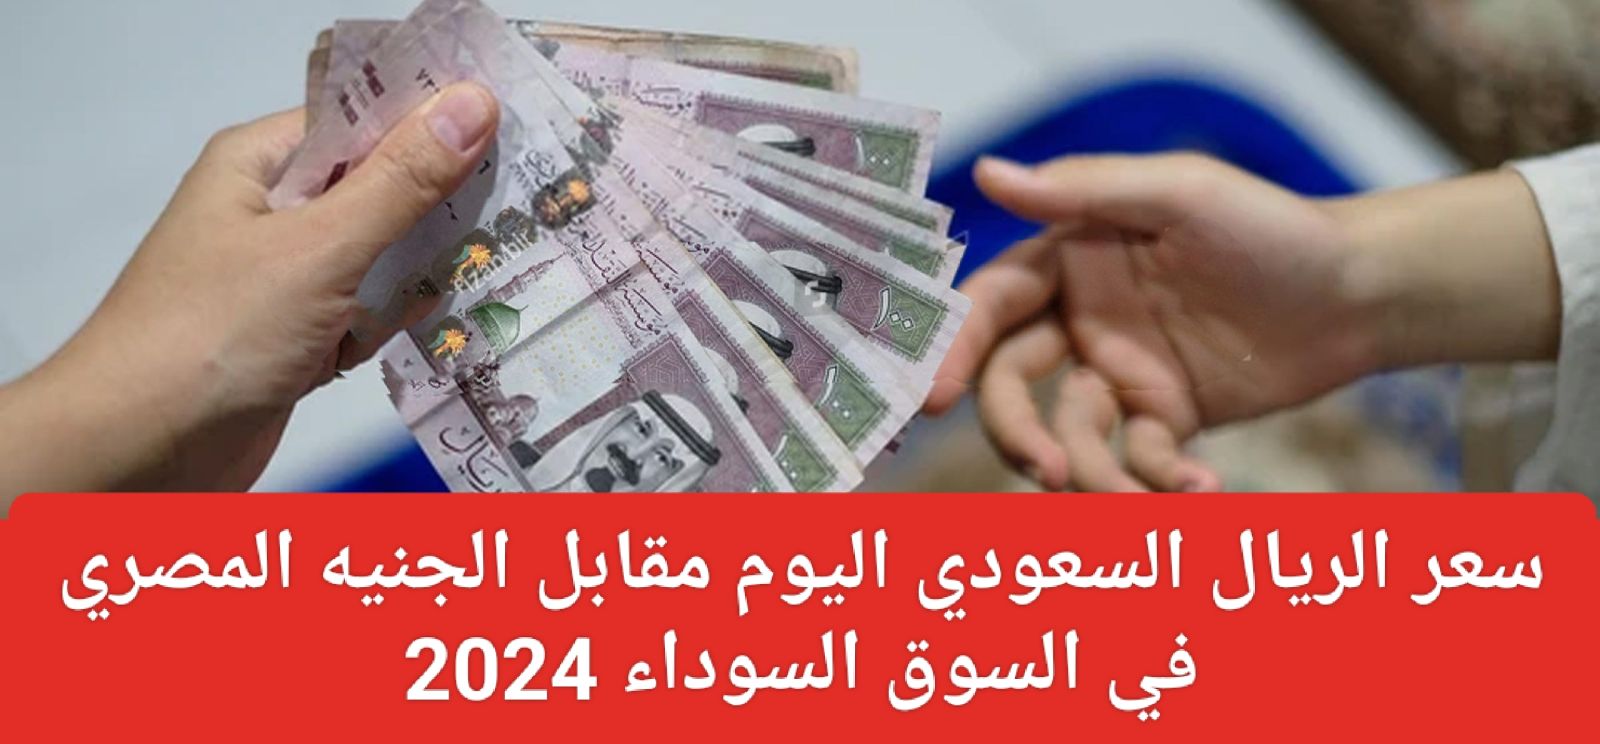 The price of the Saudi riyal against the Egyptian pound